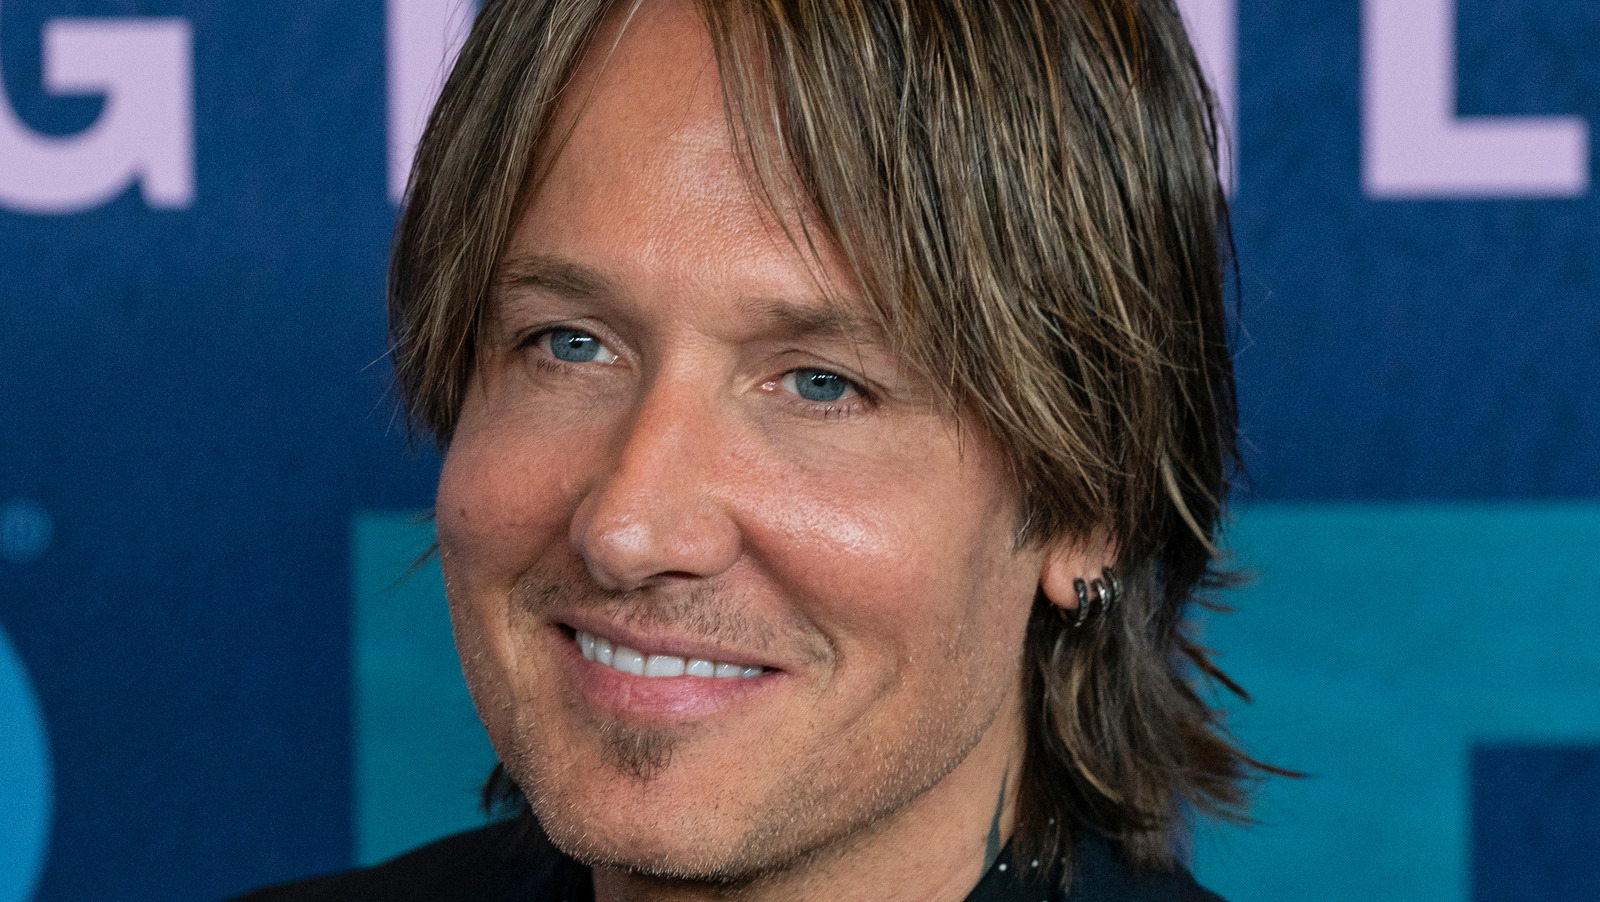 Here's What Keith Urban's Tattoos Really Mean